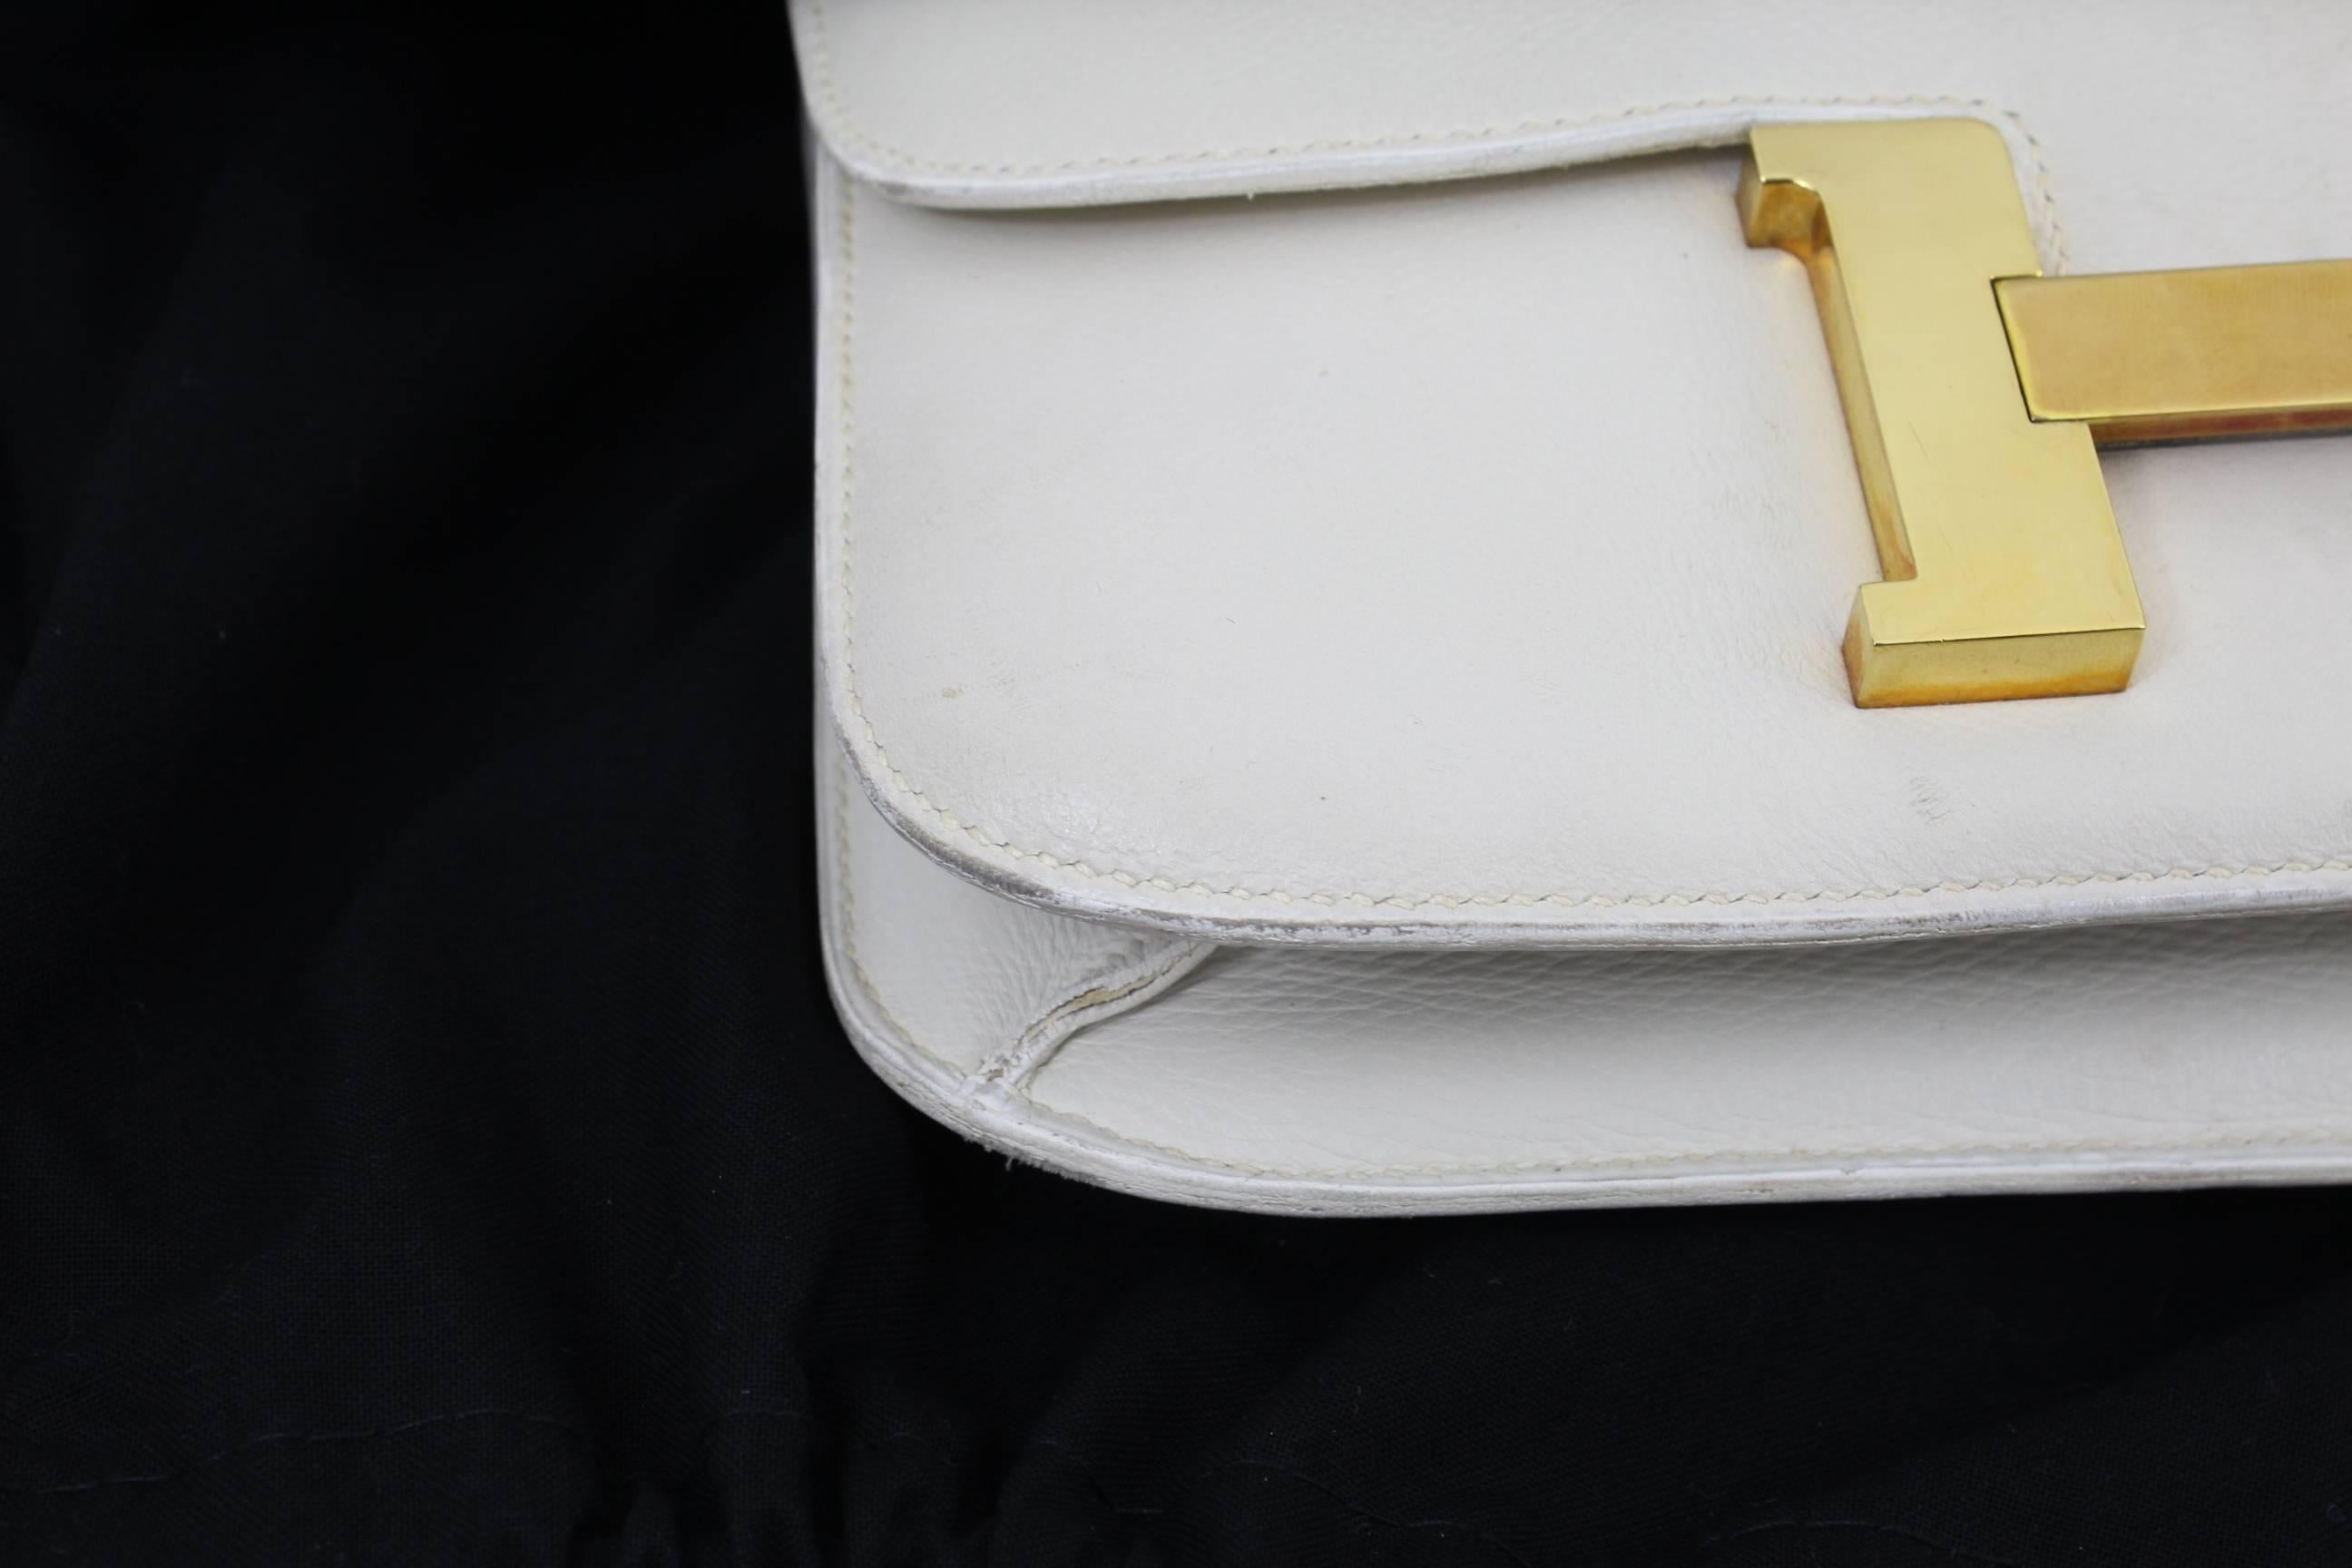 Nice Hermes Constance in white grained leather and golden hardware.
Good vintage condition but it presents some small signs of wear.

No cracking in leather as this is made from grained leather.

Size 9x7.2 inches